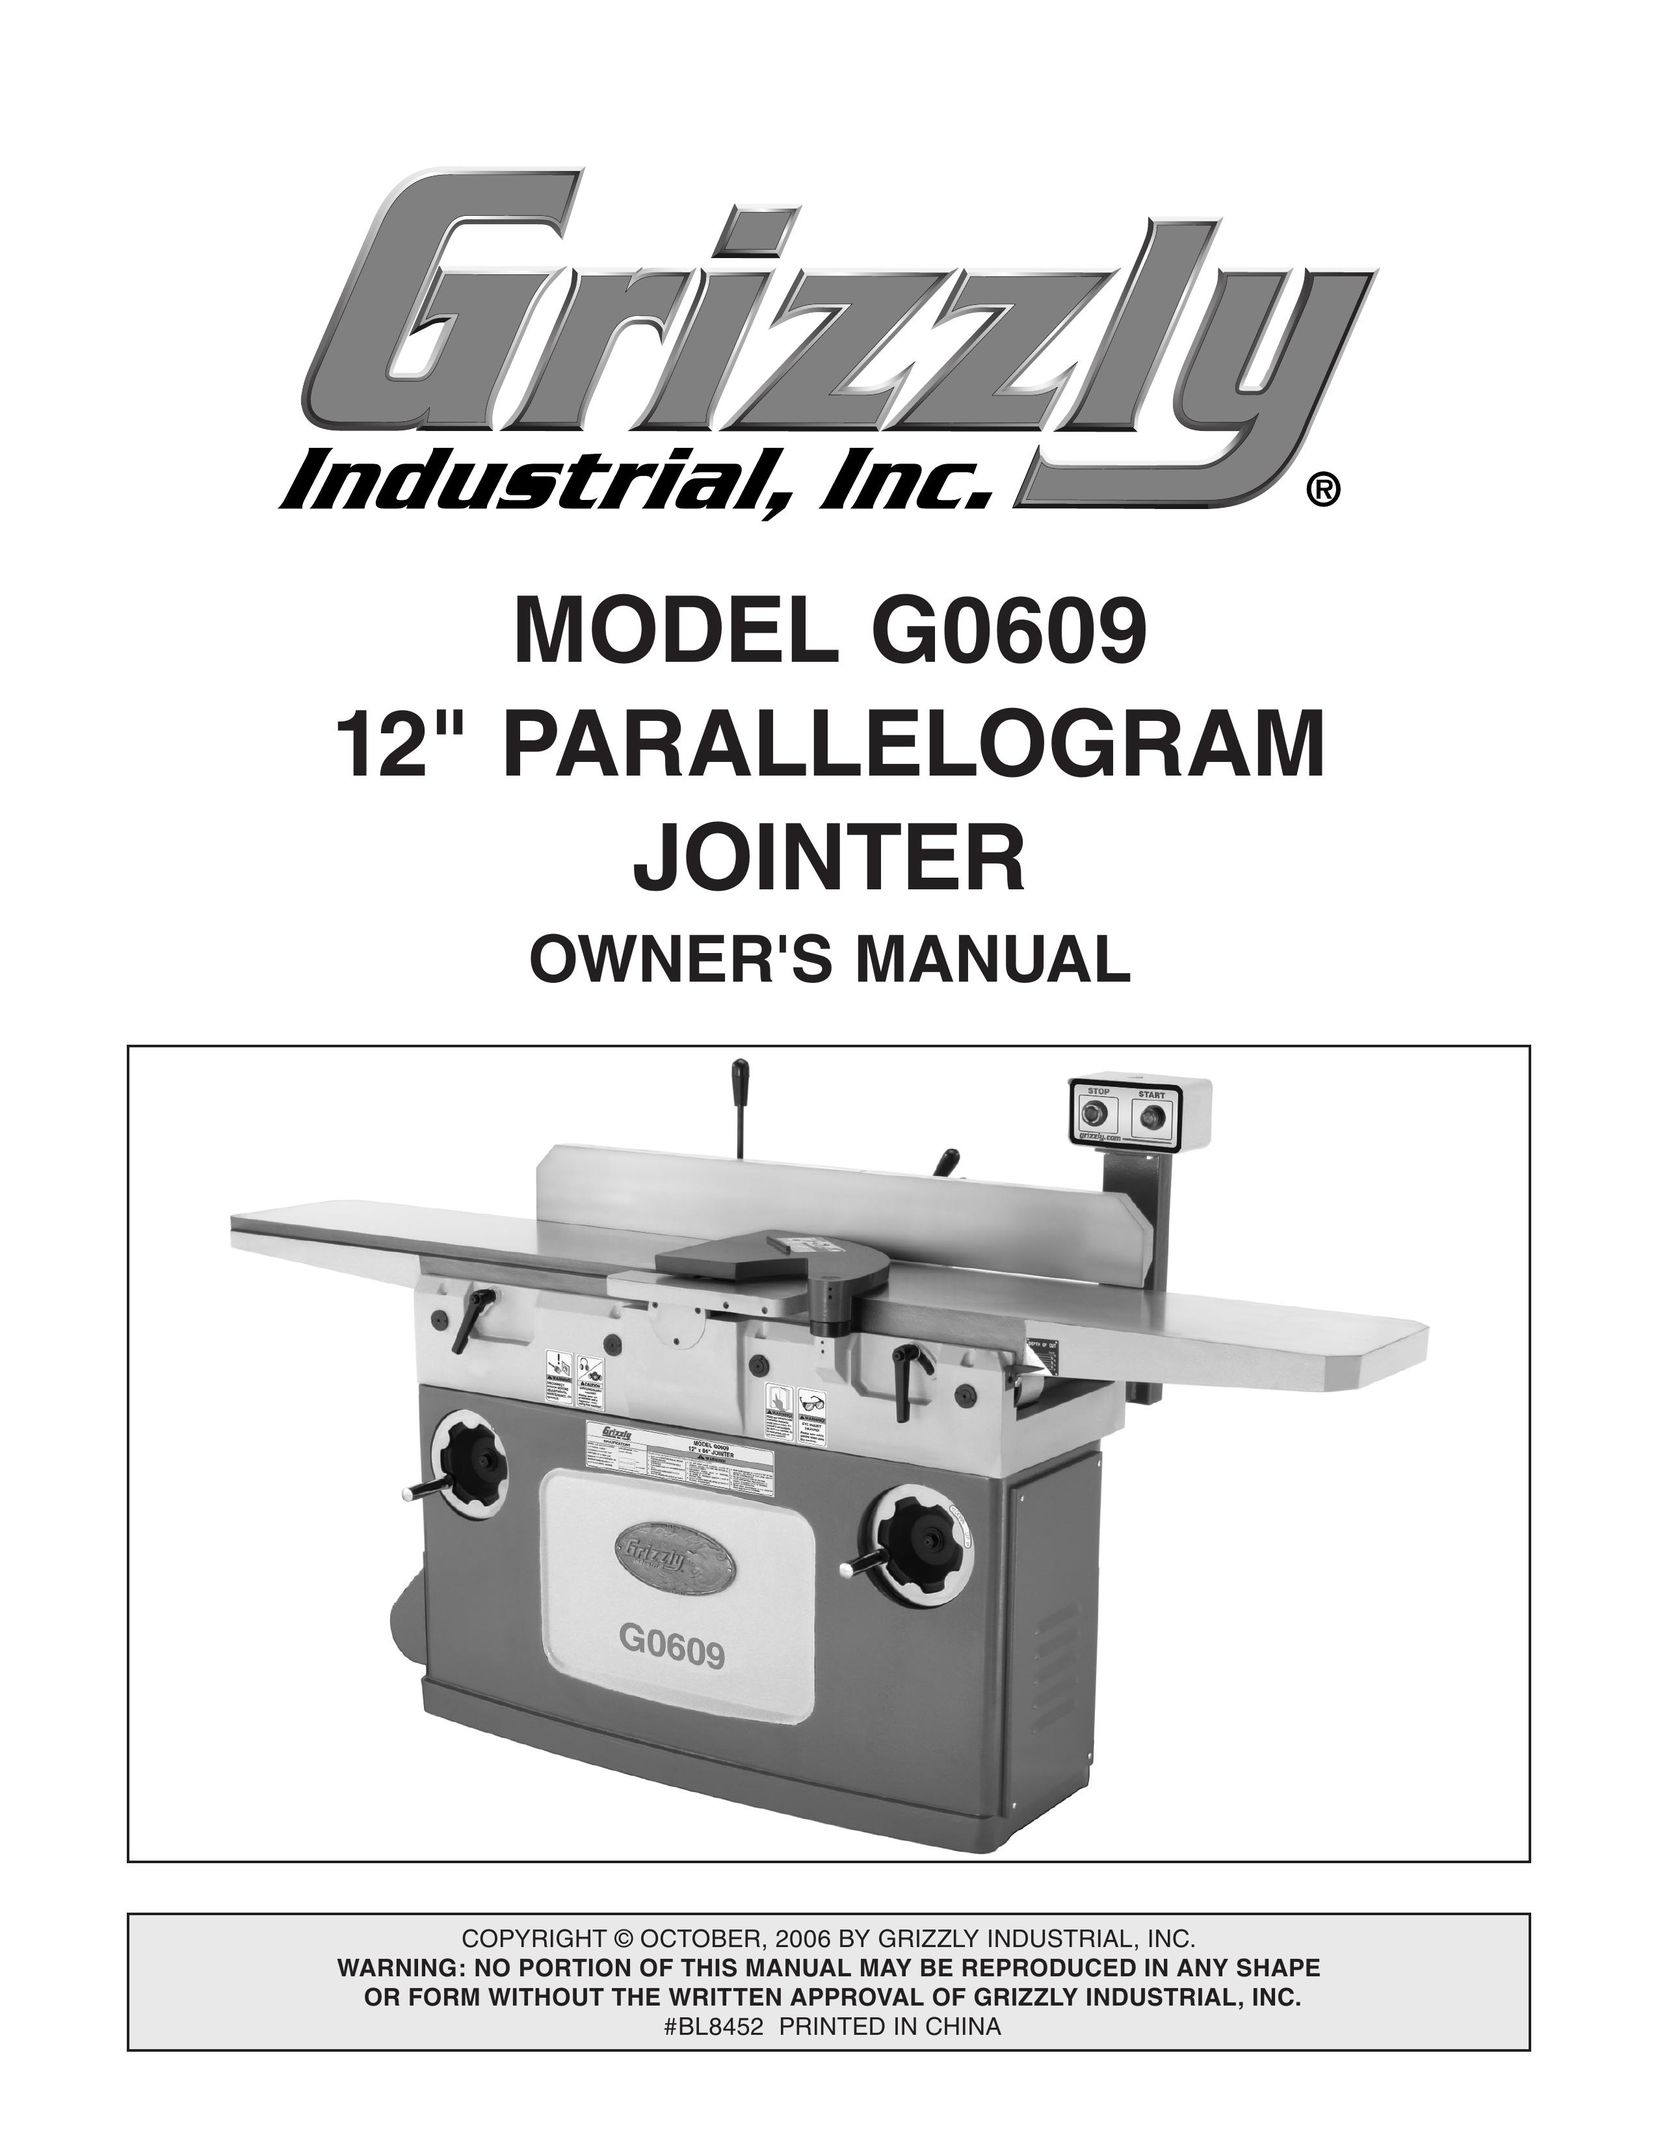 Grizzly G0609 Biscuit Joiner User Manual